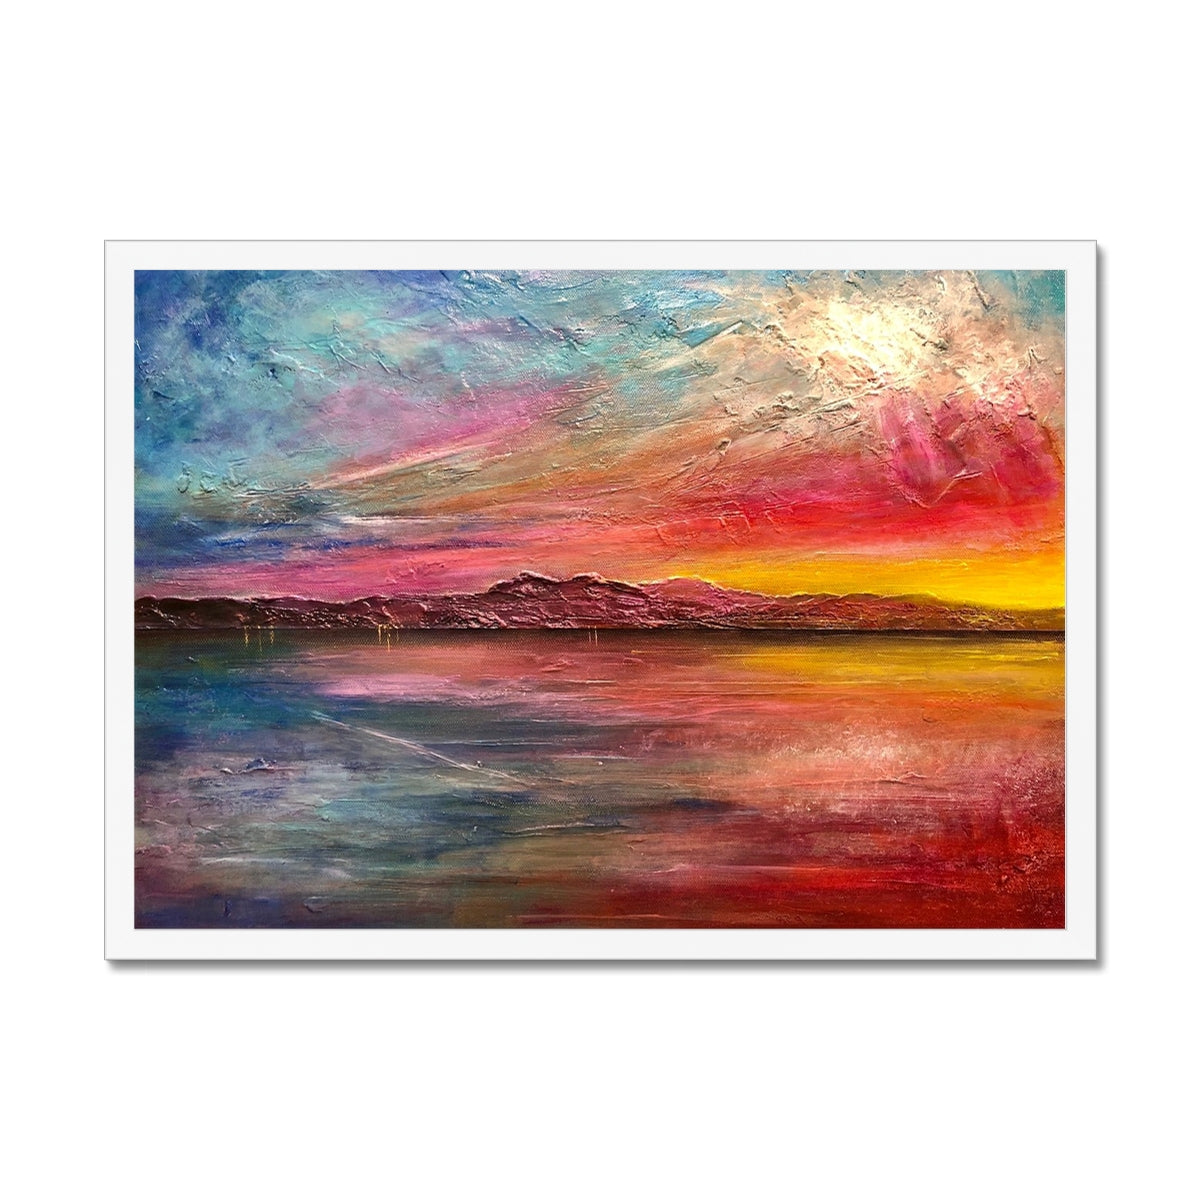 Arran Sunset ii Painting | Framed Prints From Scotland-Framed Prints-Arran Art Gallery-A2 Landscape-White Frame-Paintings, Prints, Homeware, Art Gifts From Scotland By Scottish Artist Kevin Hunter